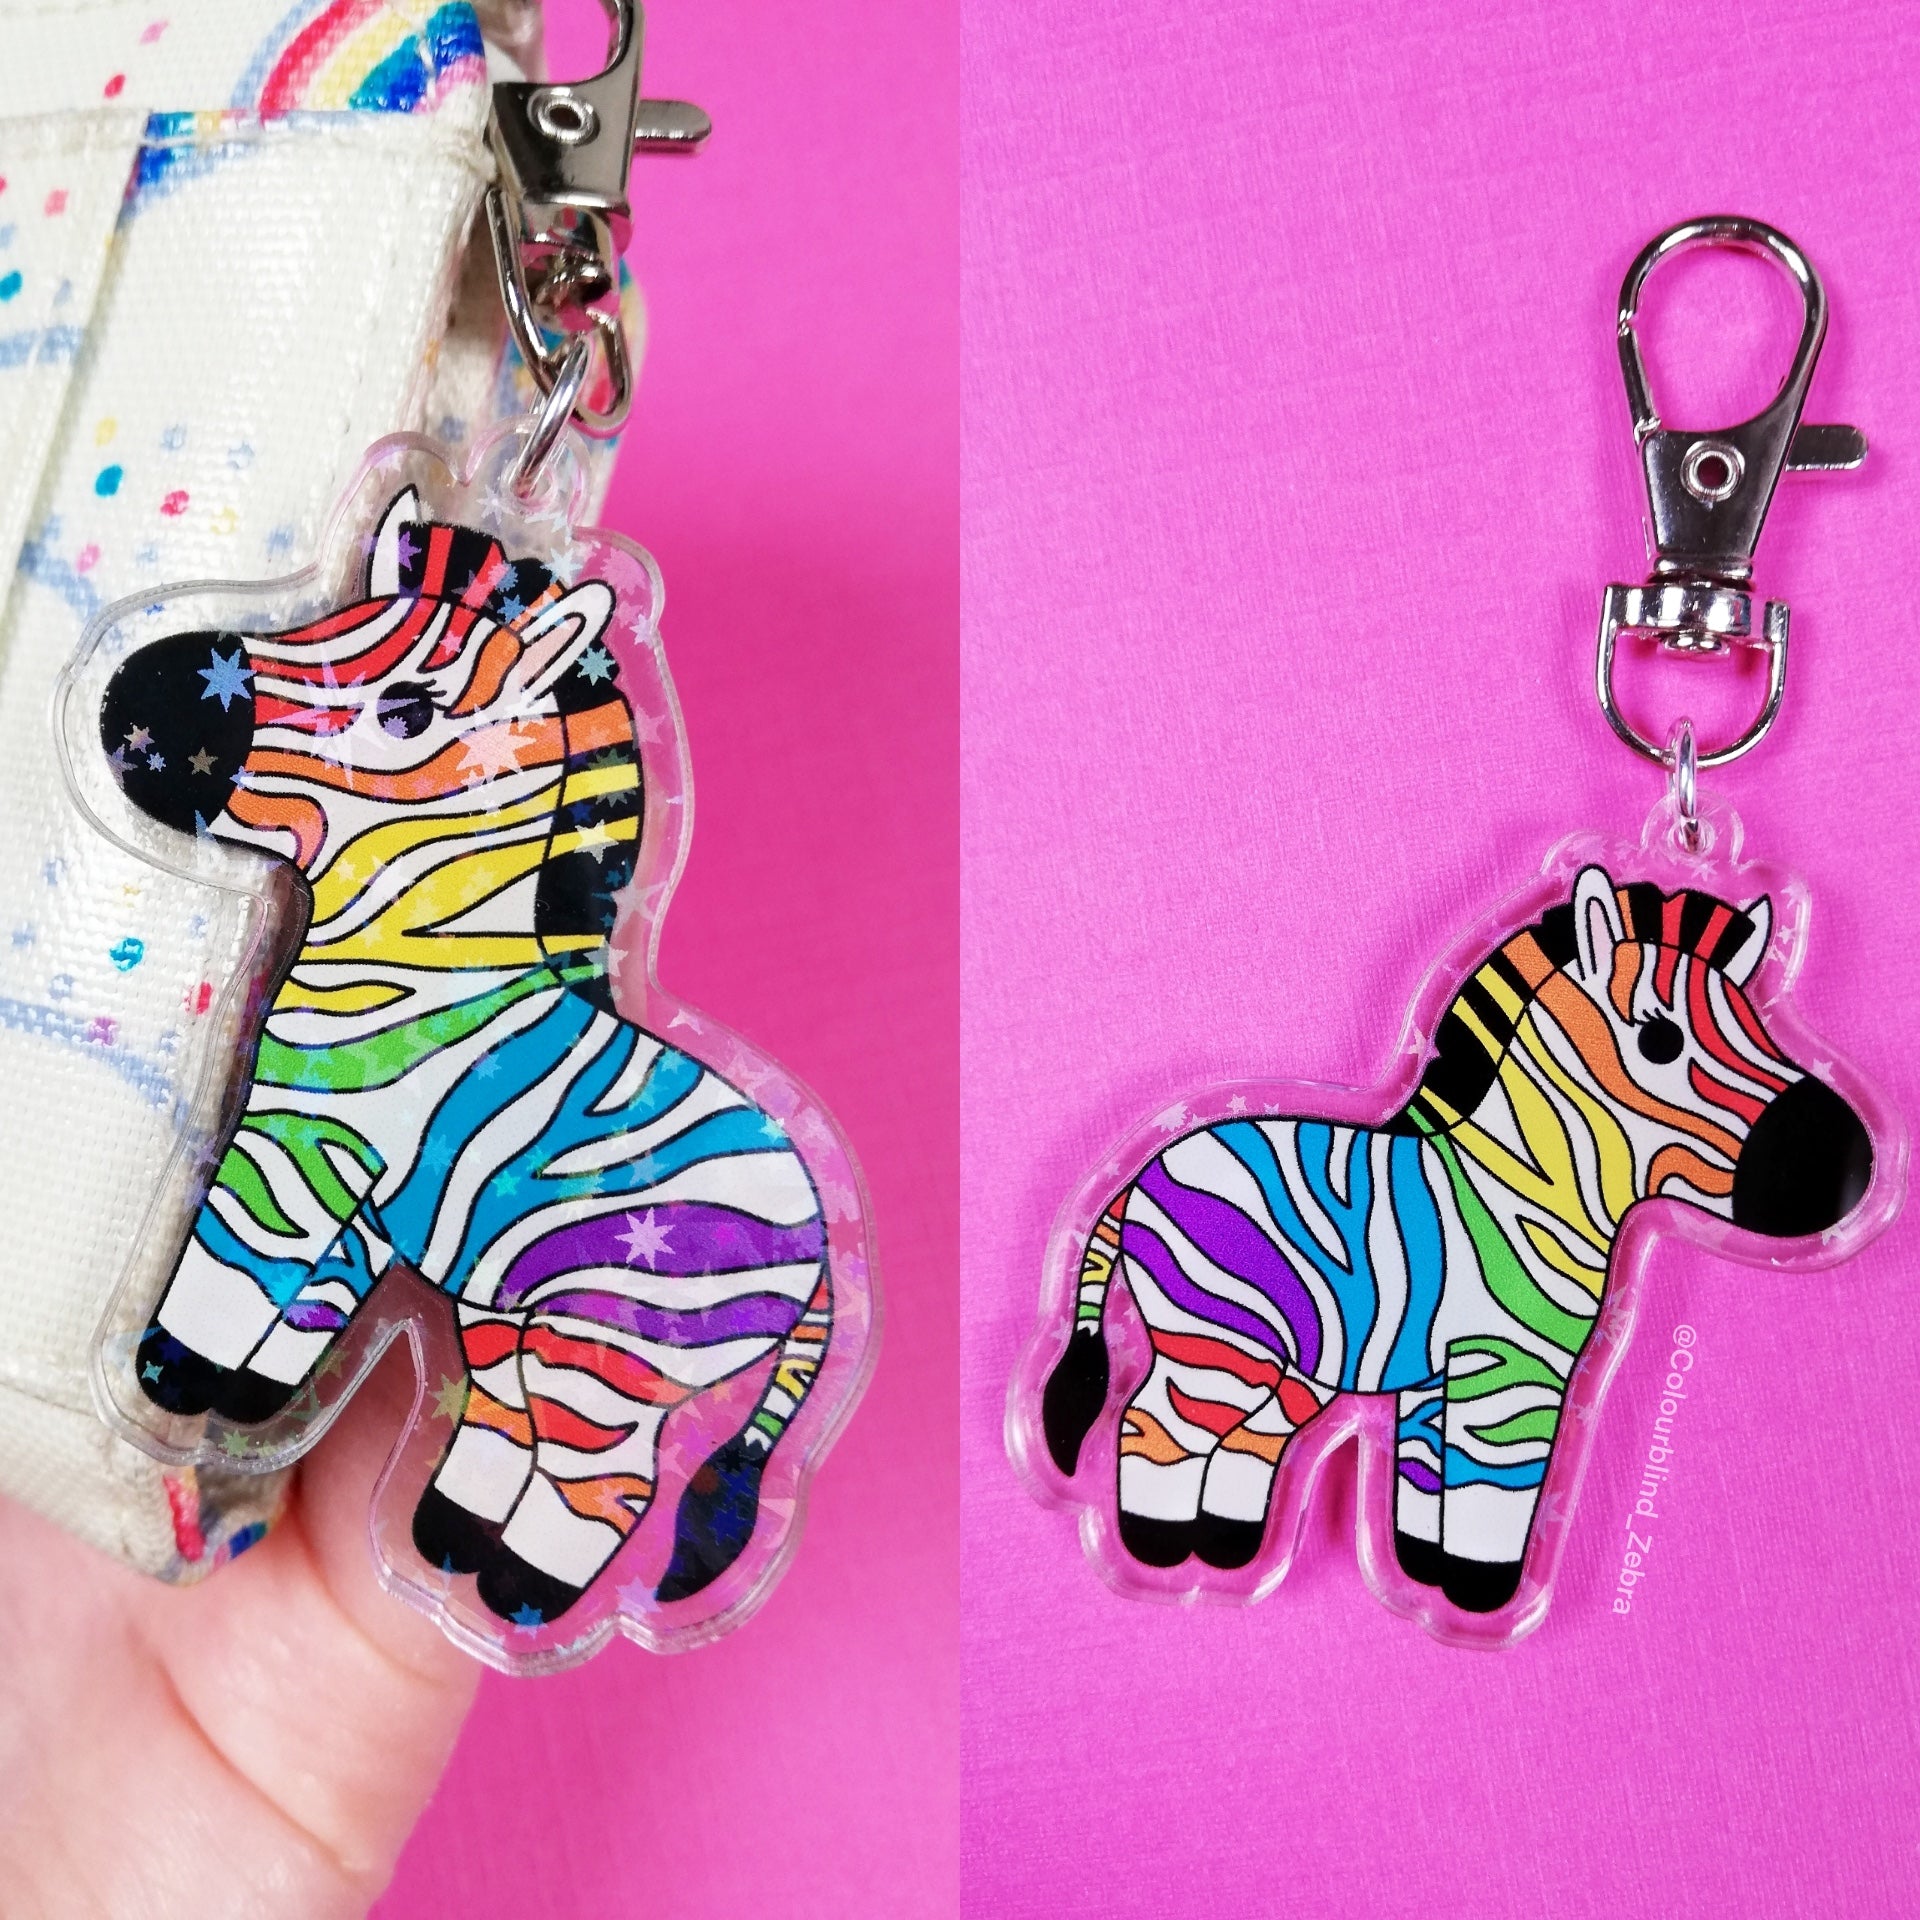 A collage of two photos. The first photo shows the front of the keyring with holographic stars and the printed zebra. The back of the keyring has the printed zebra on it too.